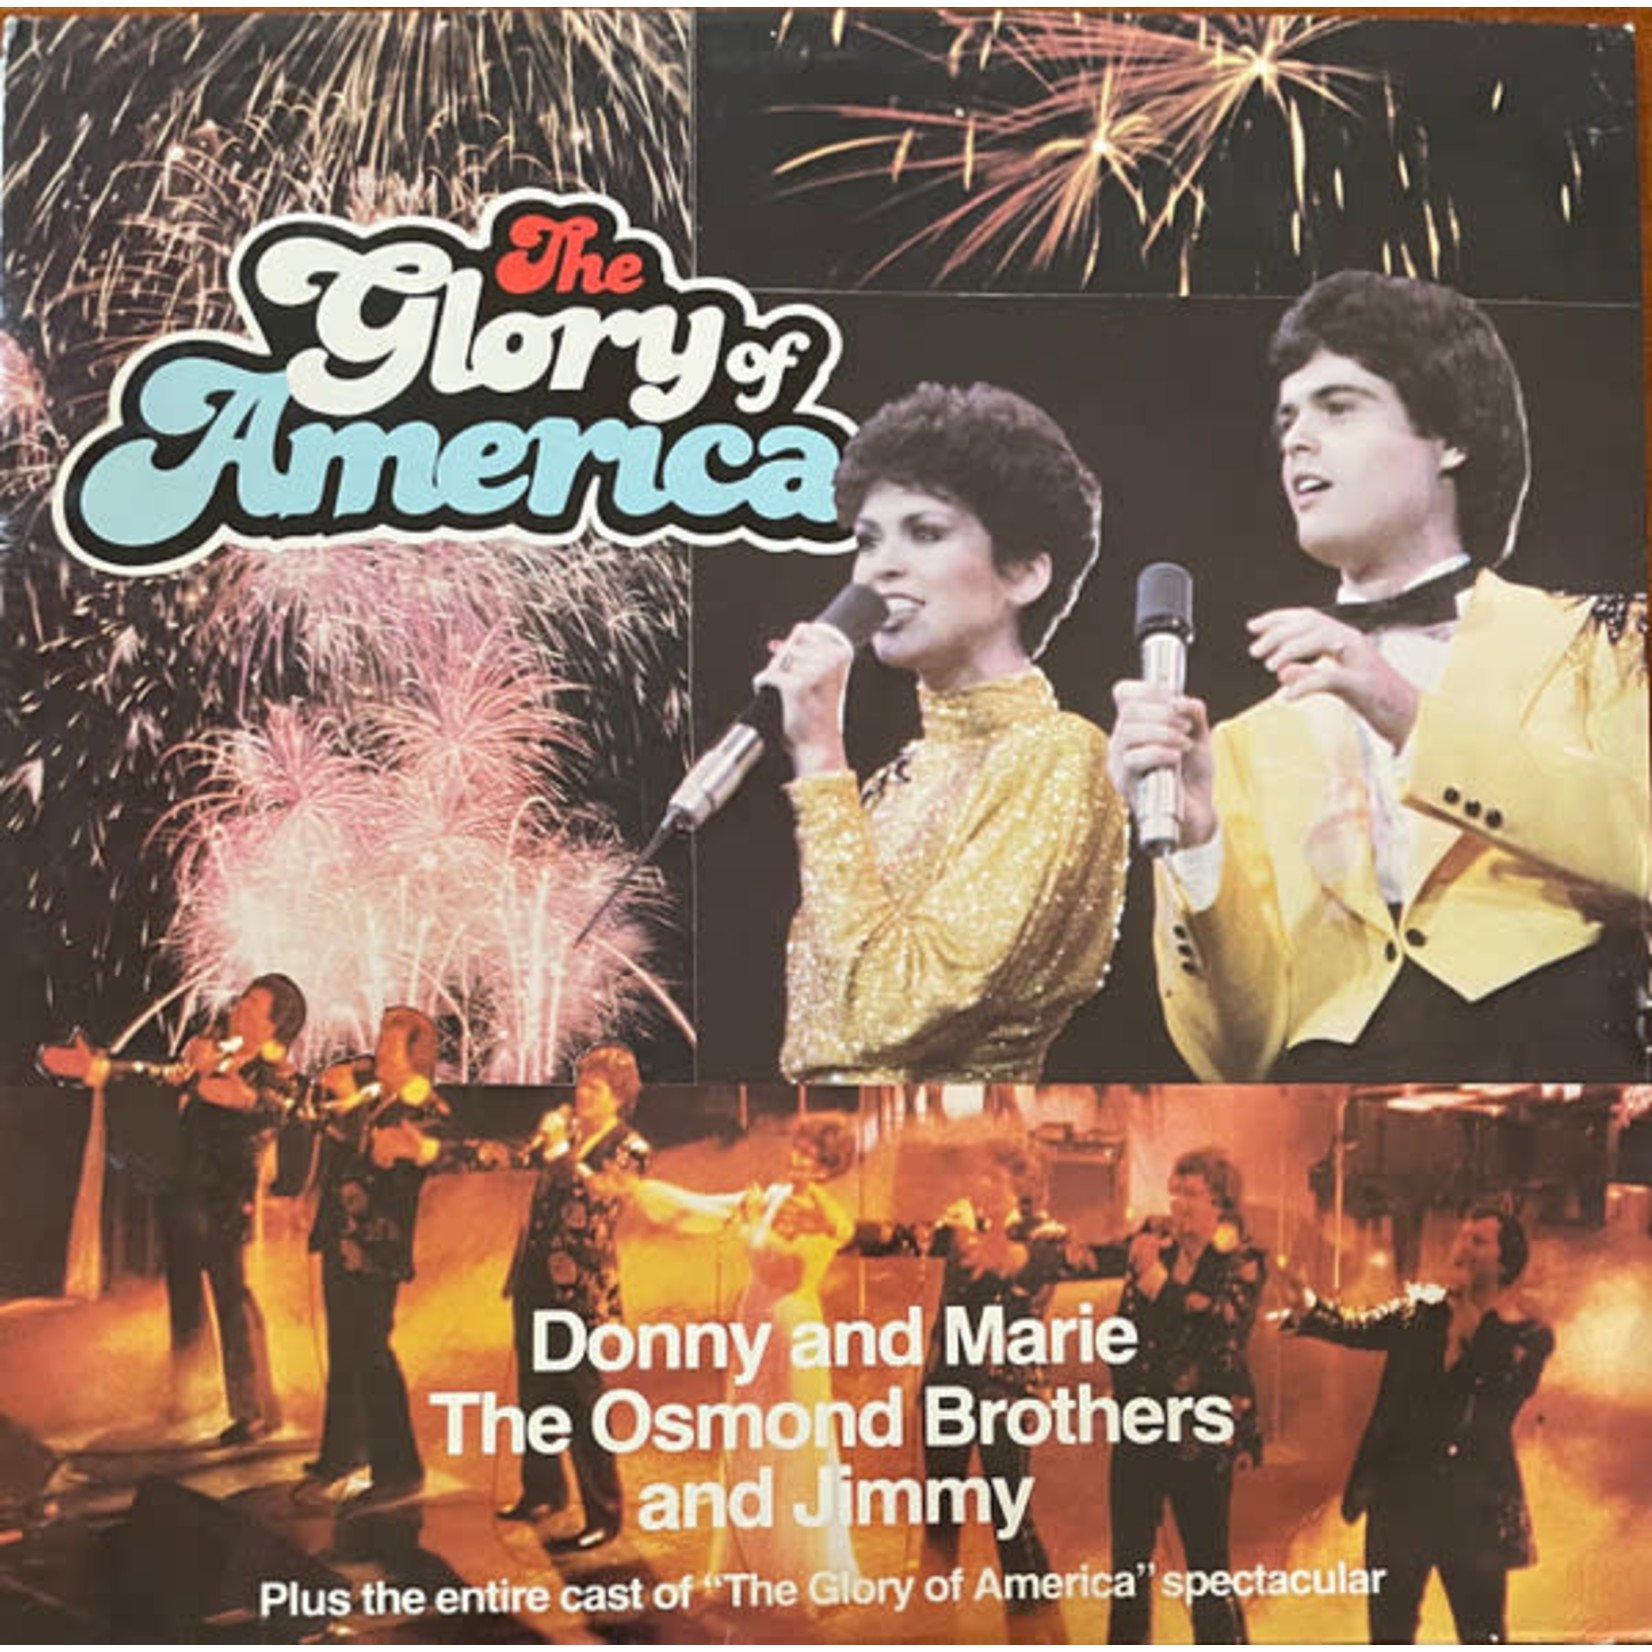 Donny & Marie Osmond Donny And Marie, The Osmond Brothers And Jimmy – The Glory Of America (VG, 1983)